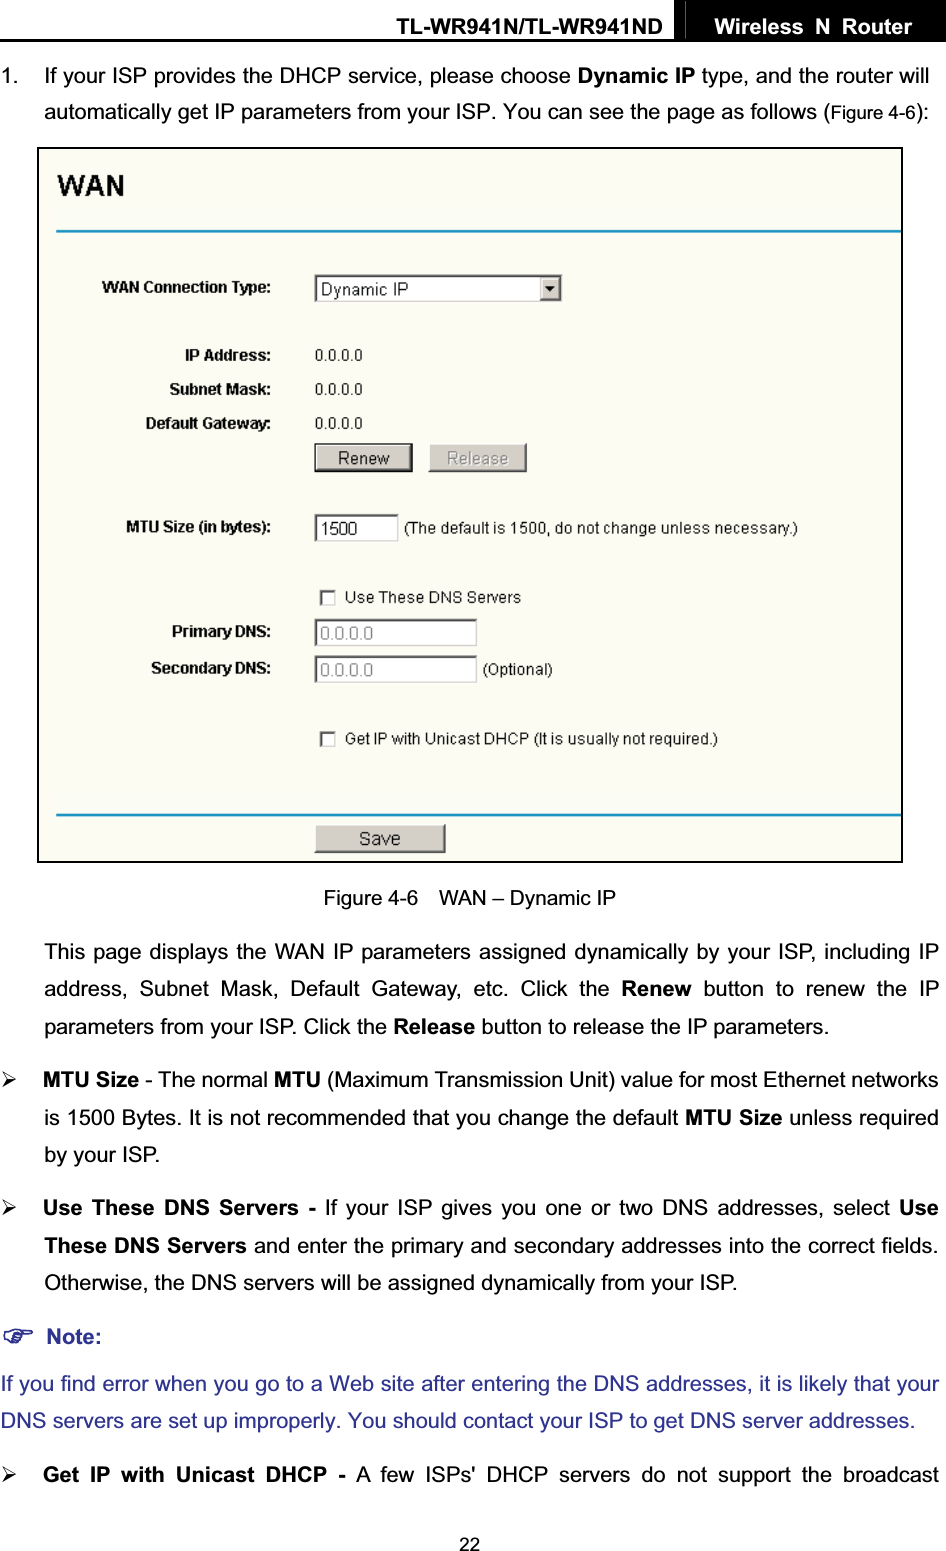 TL-WR941N/TL-WR941ND  Wireless N Router  221.  If your ISP provides the DHCP service, please choose Dynamic IP type, and the router will automatically get IP parameters from your ISP. You can see the page as follows (Figure 4-6):Figure 4-6    WAN – Dynamic IP This page displays the WAN IP parameters assigned dynamically by your ISP, including IP address, Subnet Mask, Default Gateway, etc. Click the Renew button to renew the IP parameters from your ISP. Click the Release button to release the IP parameters. ¾MTU Size - The normal MTU (Maximum Transmission Unit) value for most Ethernet networks is 1500 Bytes. It is not recommended that you change the default MTU Size unless required by your ISP.   ¾Use These DNS Servers - If your ISP gives you one or two DNS addresses, select Use These DNS Servers and enter the primary and secondary addresses into the correct fields. Otherwise, the DNS servers will be assigned dynamically from your ISP.   )Note:If you find error when you go to a Web site after entering the DNS addresses, it is likely that your DNS servers are set up improperly. You should contact your ISP to get DNS server addresses.   ¾Get IP with Unicast DHCP - A few ISPs&apos; DHCP servers do not support the broadcast     